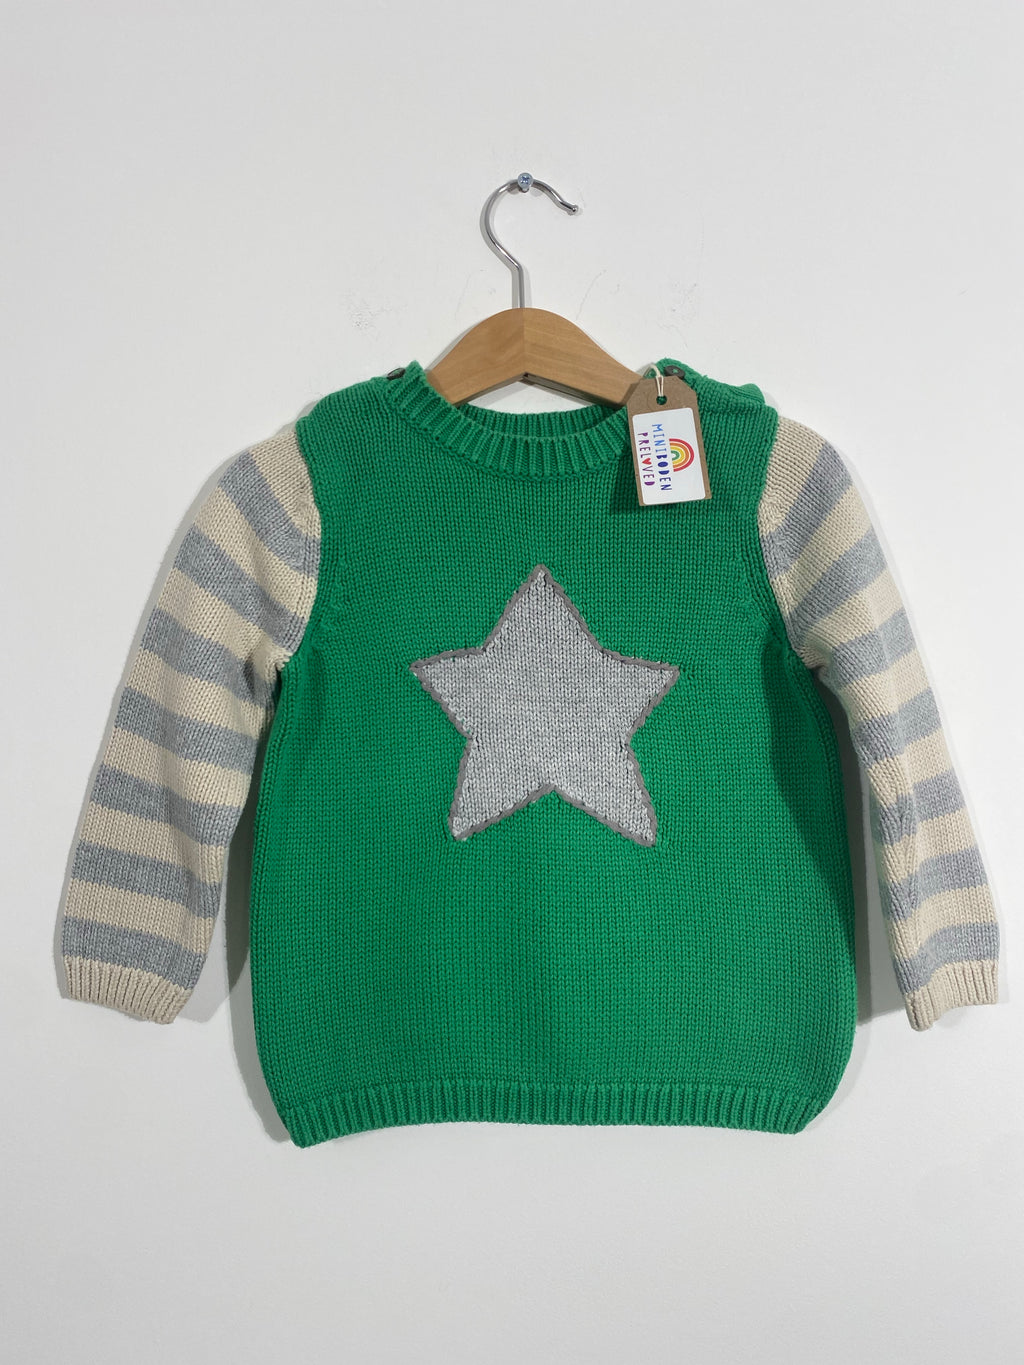 Chunky Star Design Green Knitted Jumper (18-24 Months)